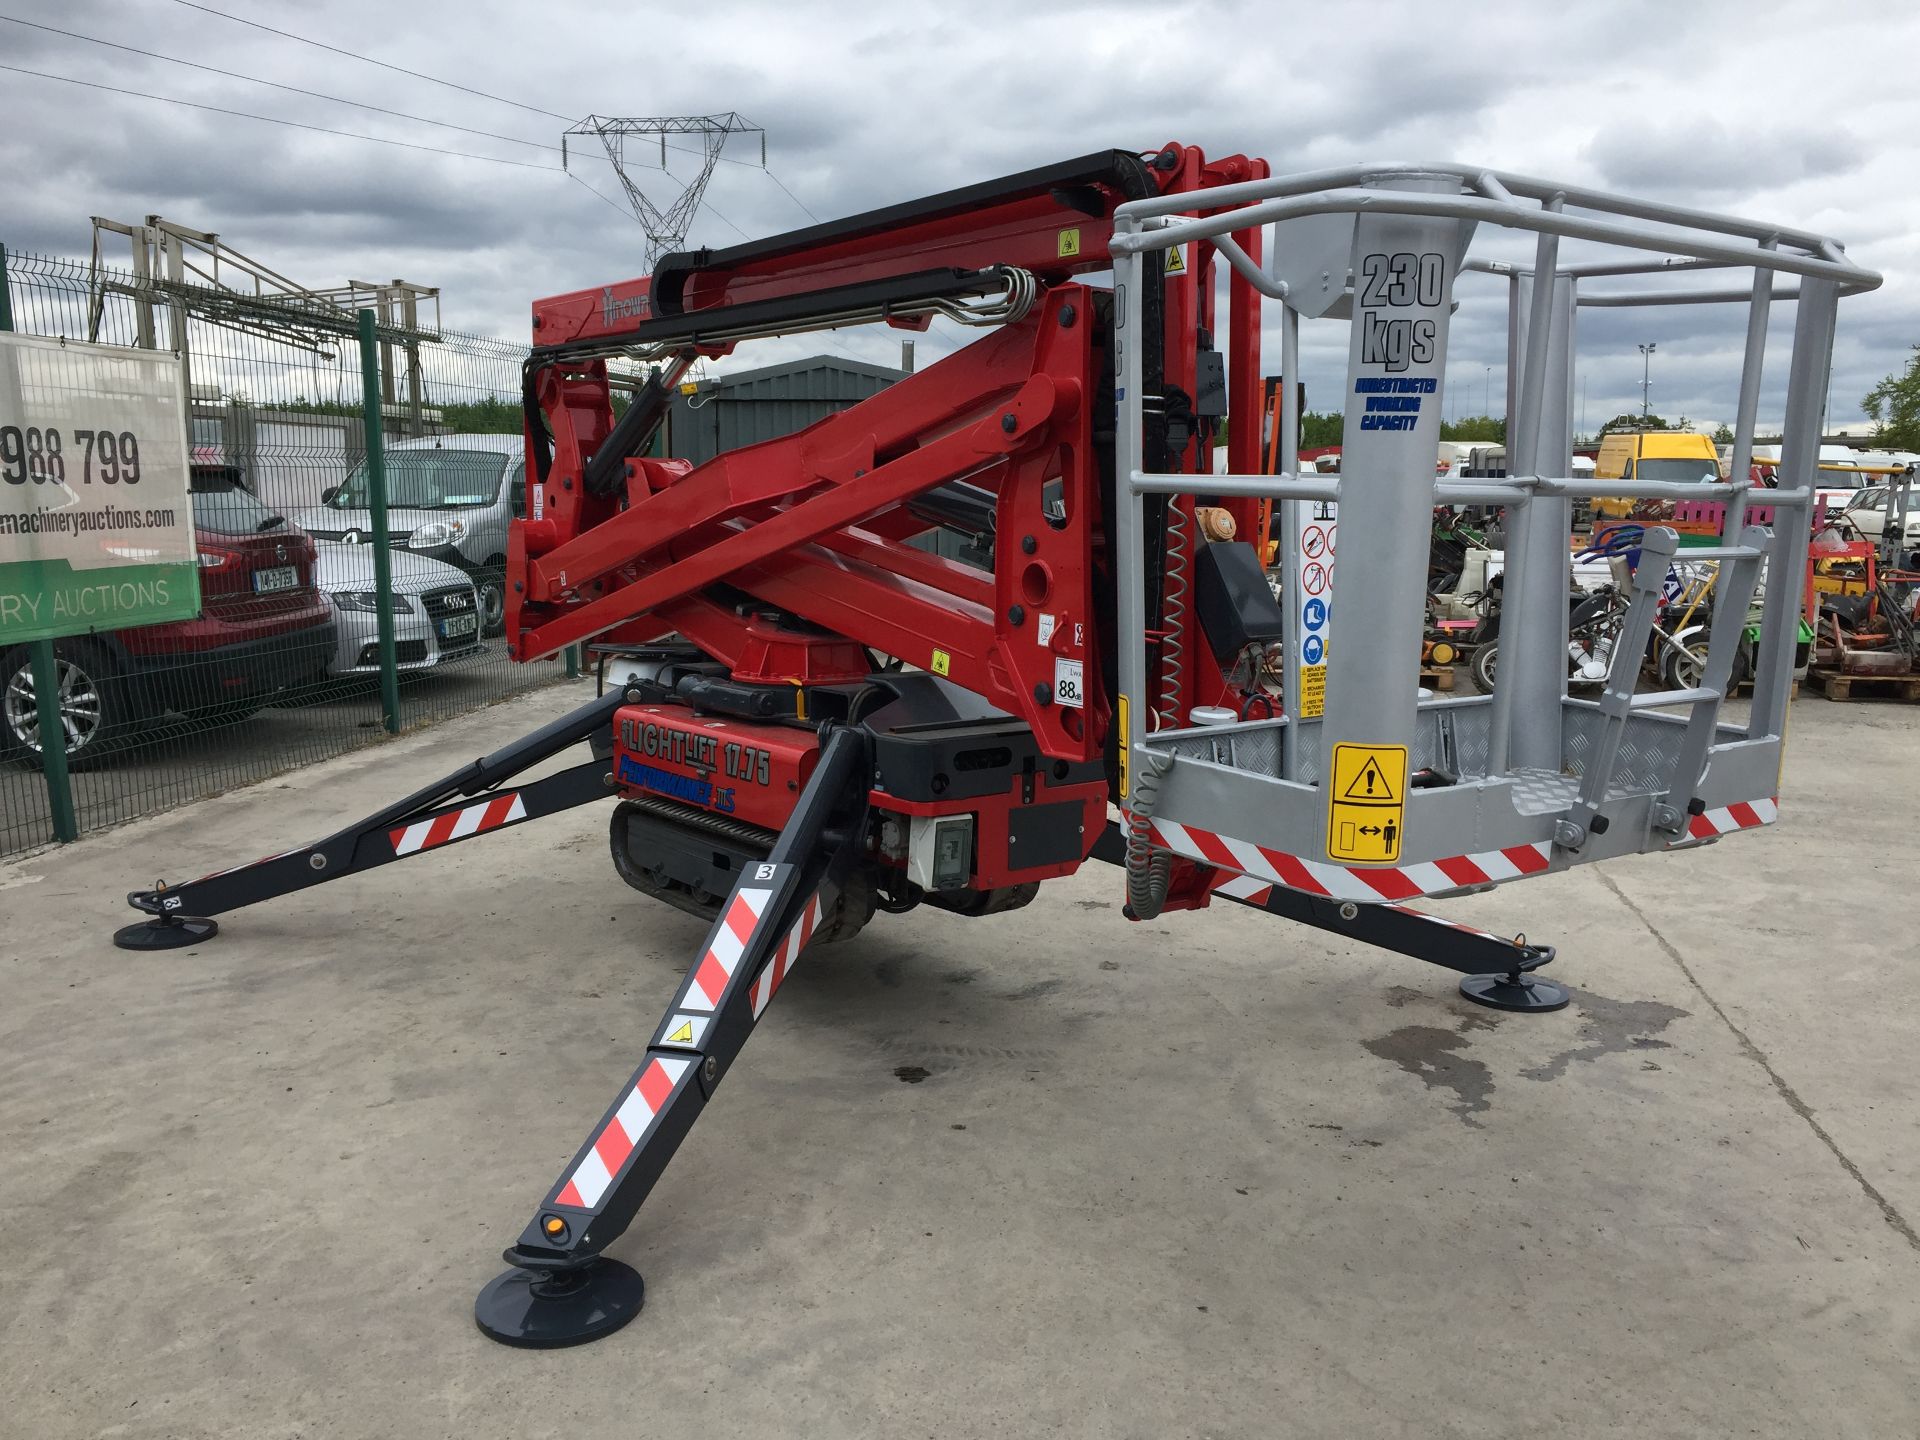 PL-14631 2012 Hinowa Lightlift 17.75 Performance Tracked Articulated Spider Boom Lift - Image 10 of 26